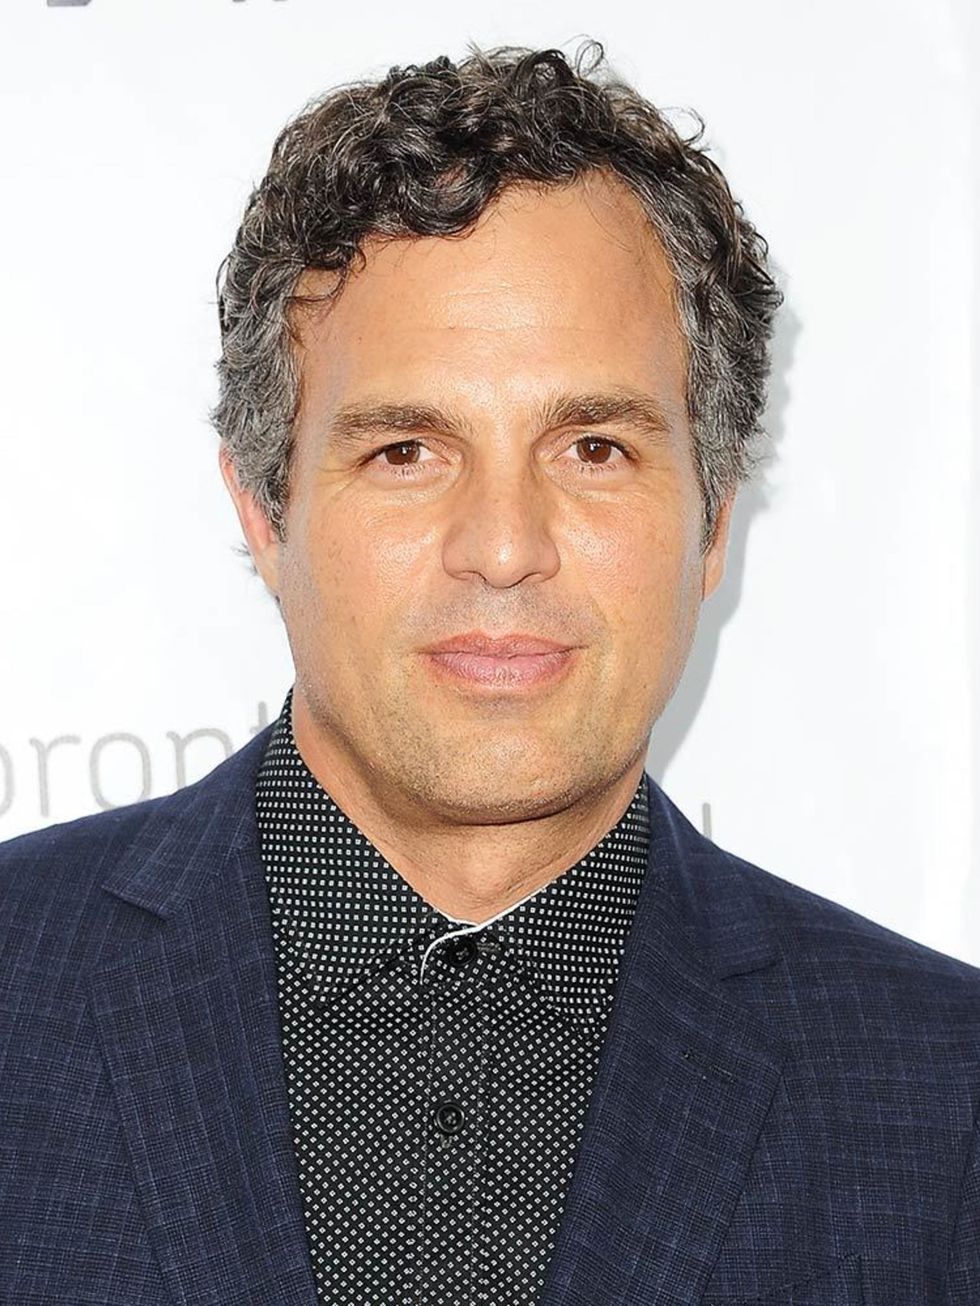 <p><a href="http://markruffalo.tumblr.com/" target="_blank">Mark Ruffalo</a></p>

<p>On people who say they aren't feminists: '<span style="line-height:1.6">You're insulting every woman who was forcibly restrained in a jail cell with a feeding tube down h